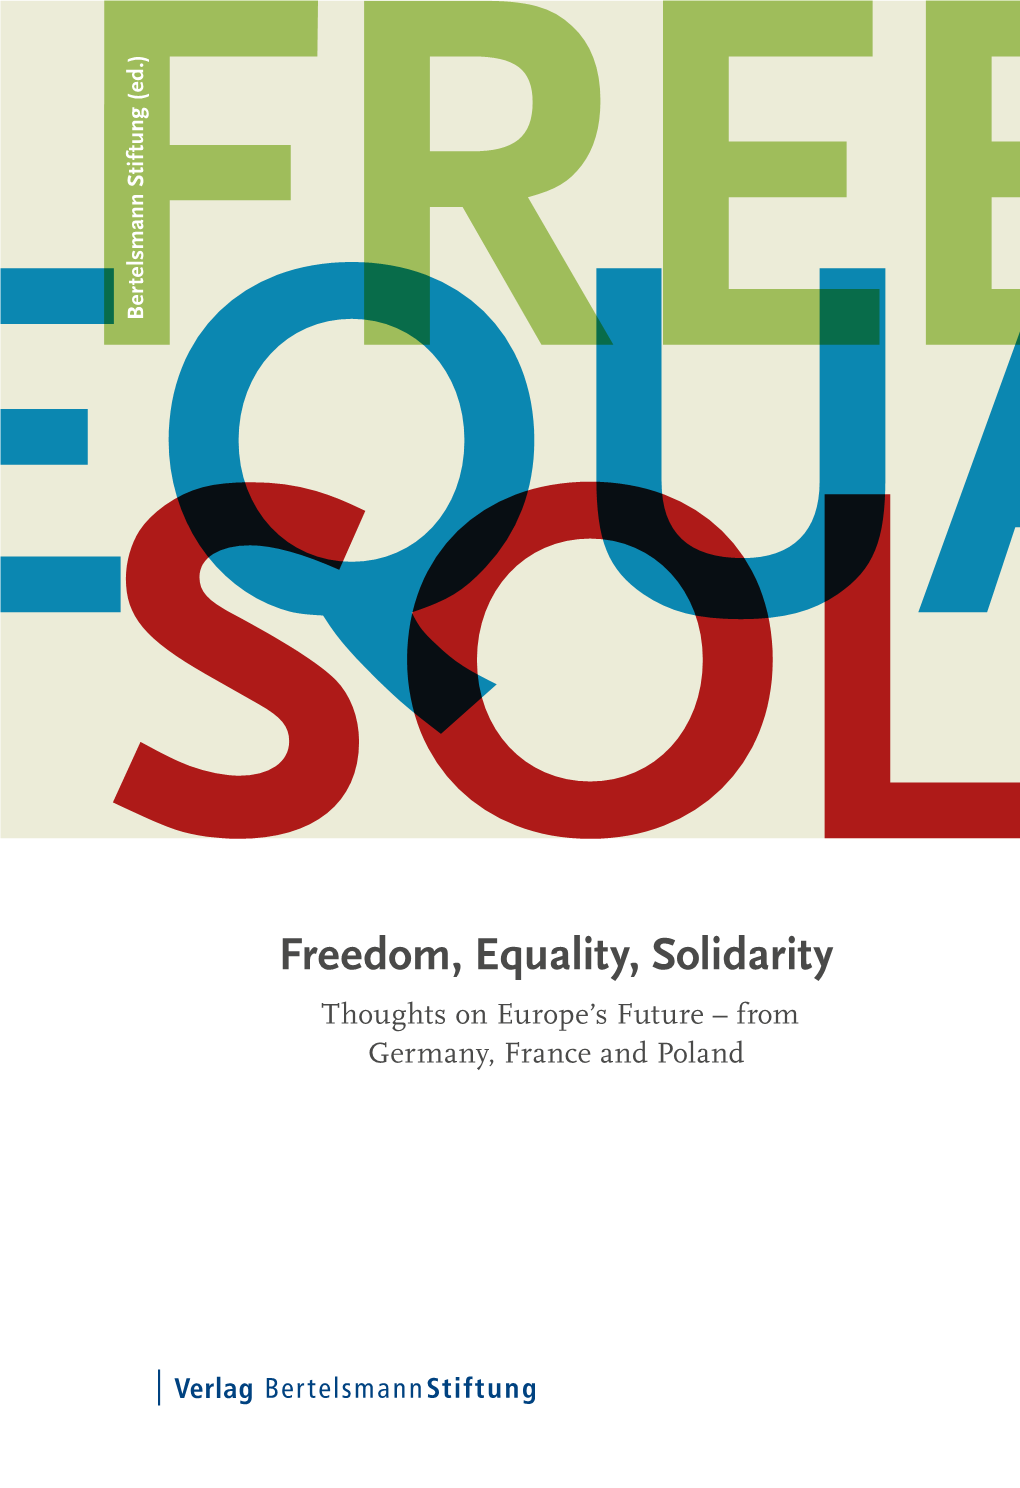 Freedom, Equality, Solidarity